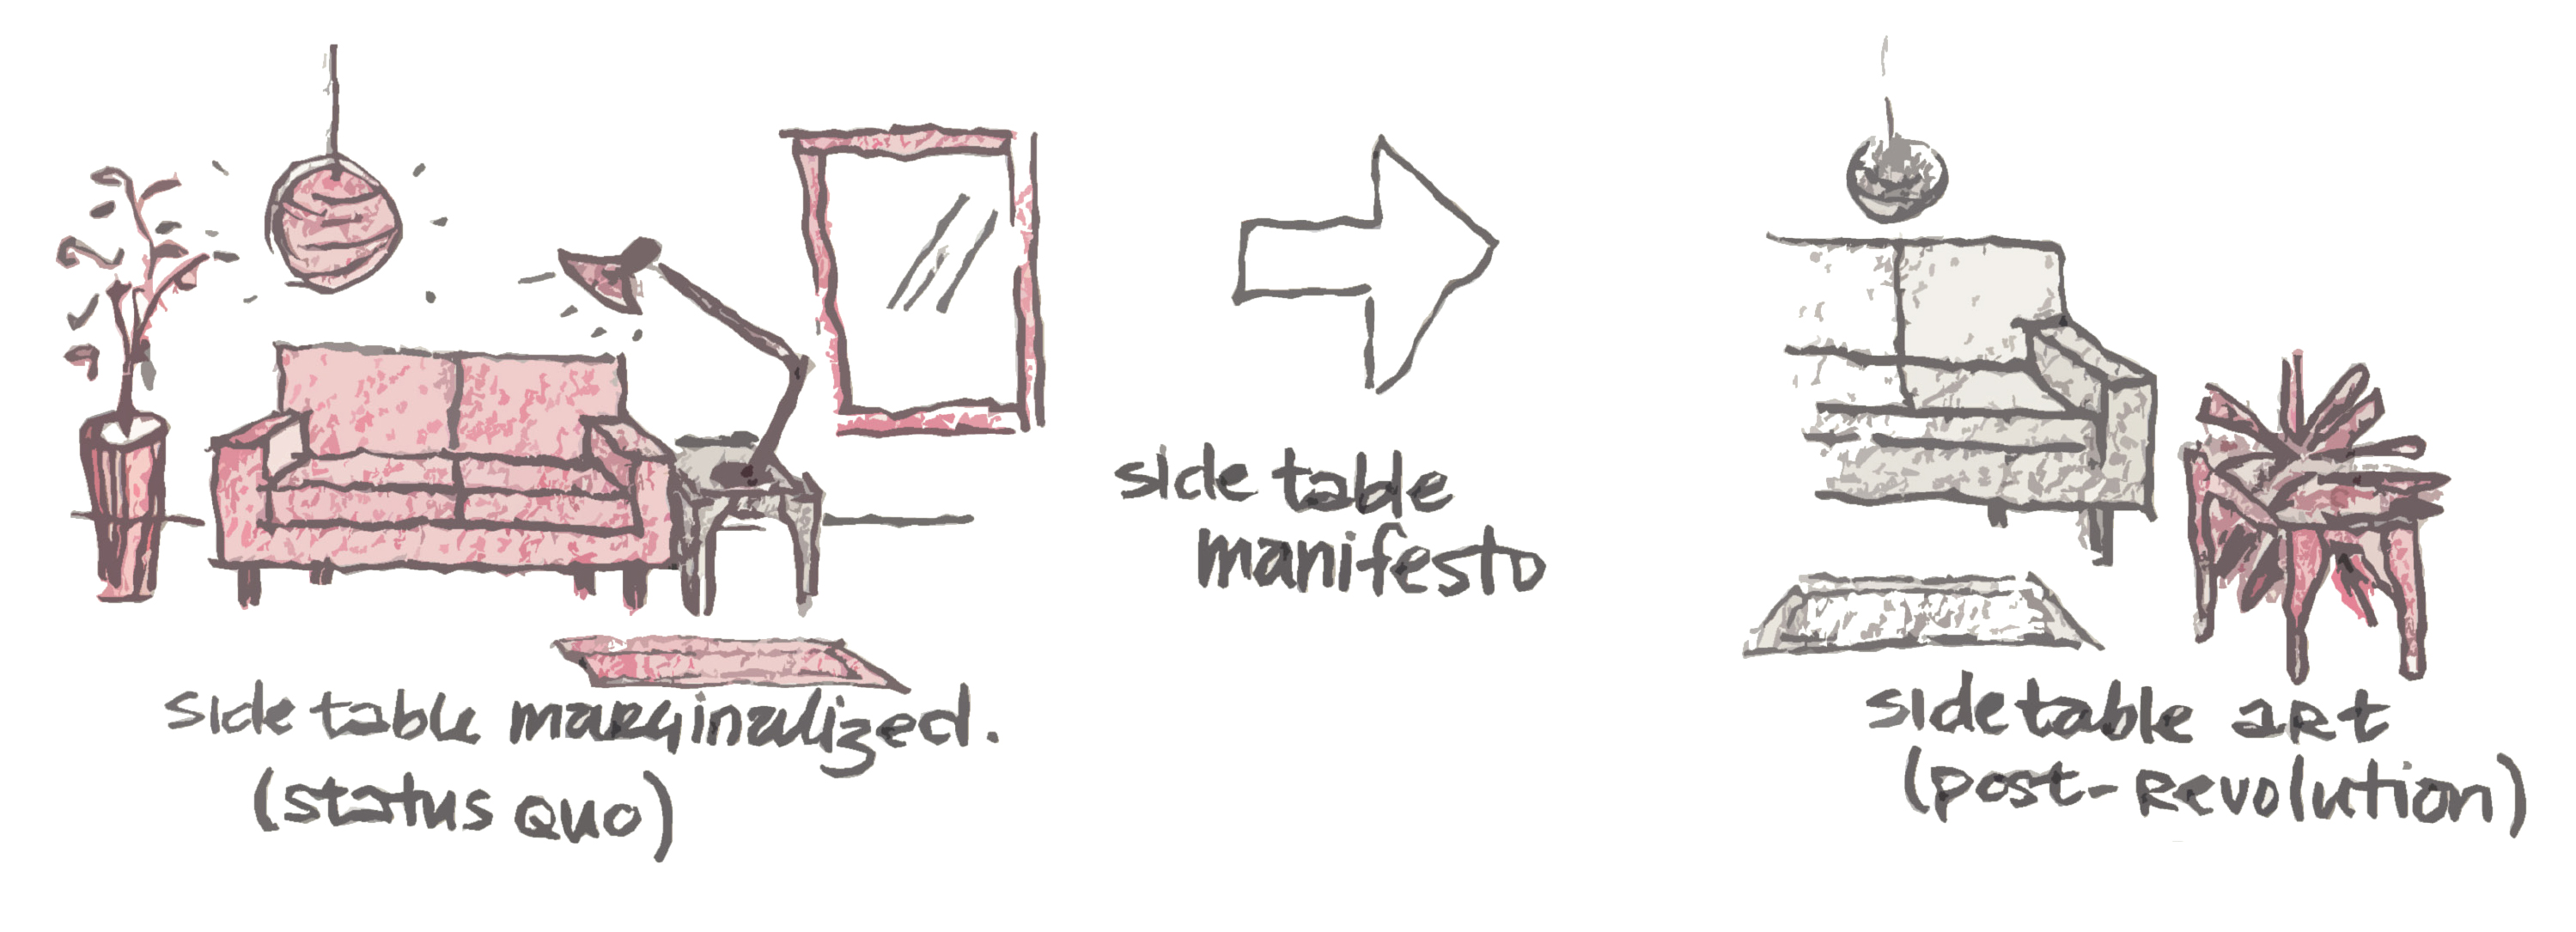 Stealth Whimsy Design Process: Concept Sketch of the Side Table Manifesto